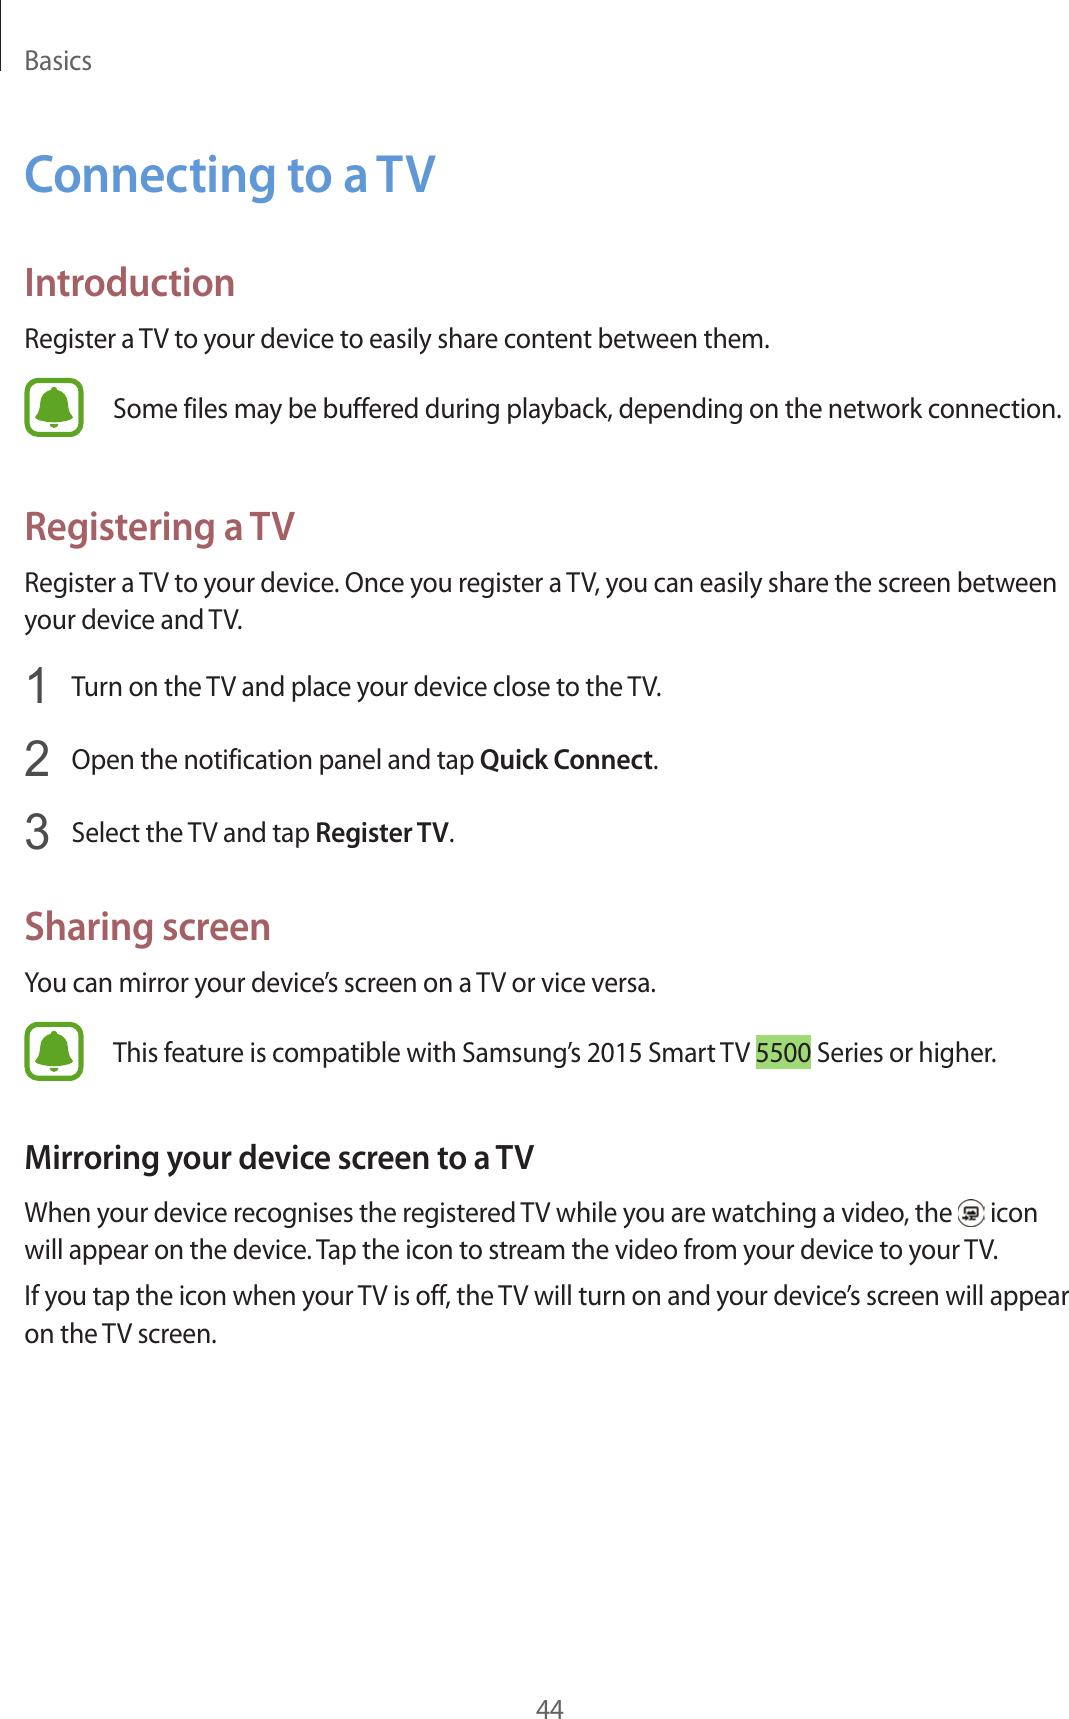 Basics44C onnecting to a TVIntroductionRegister a TV to your device t o easily shar e c ont ent between them.Some files may be buffer ed during pla yback, depending on the network connection.Registering a TVRegister a TV to your device. Once you reg ister a TV, you can easily shar e the scr een between your device and TV.1  Turn on the TV and place your device close to the TV.2  Open the notification panel and tap Quick Connect.3  Select the TV and tap Register TV.Sharing screenYou can mirror your device’s screen on a TV or vice versa.This f eatur e is c ompatible with Samsung’s 2015 Smart TV 5500 Series or higher.Mirroring your de vic e screen t o a TVWhen your devic e r ecog nises the r eg ister ed TV while you are wat ching a video, the   icon will appear on the device . Tap the icon to stream the video from y our devic e t o y our TV.If you tap the icon when your TV is off , the TV will turn on and your devic e’s screen will appear on the TV screen.